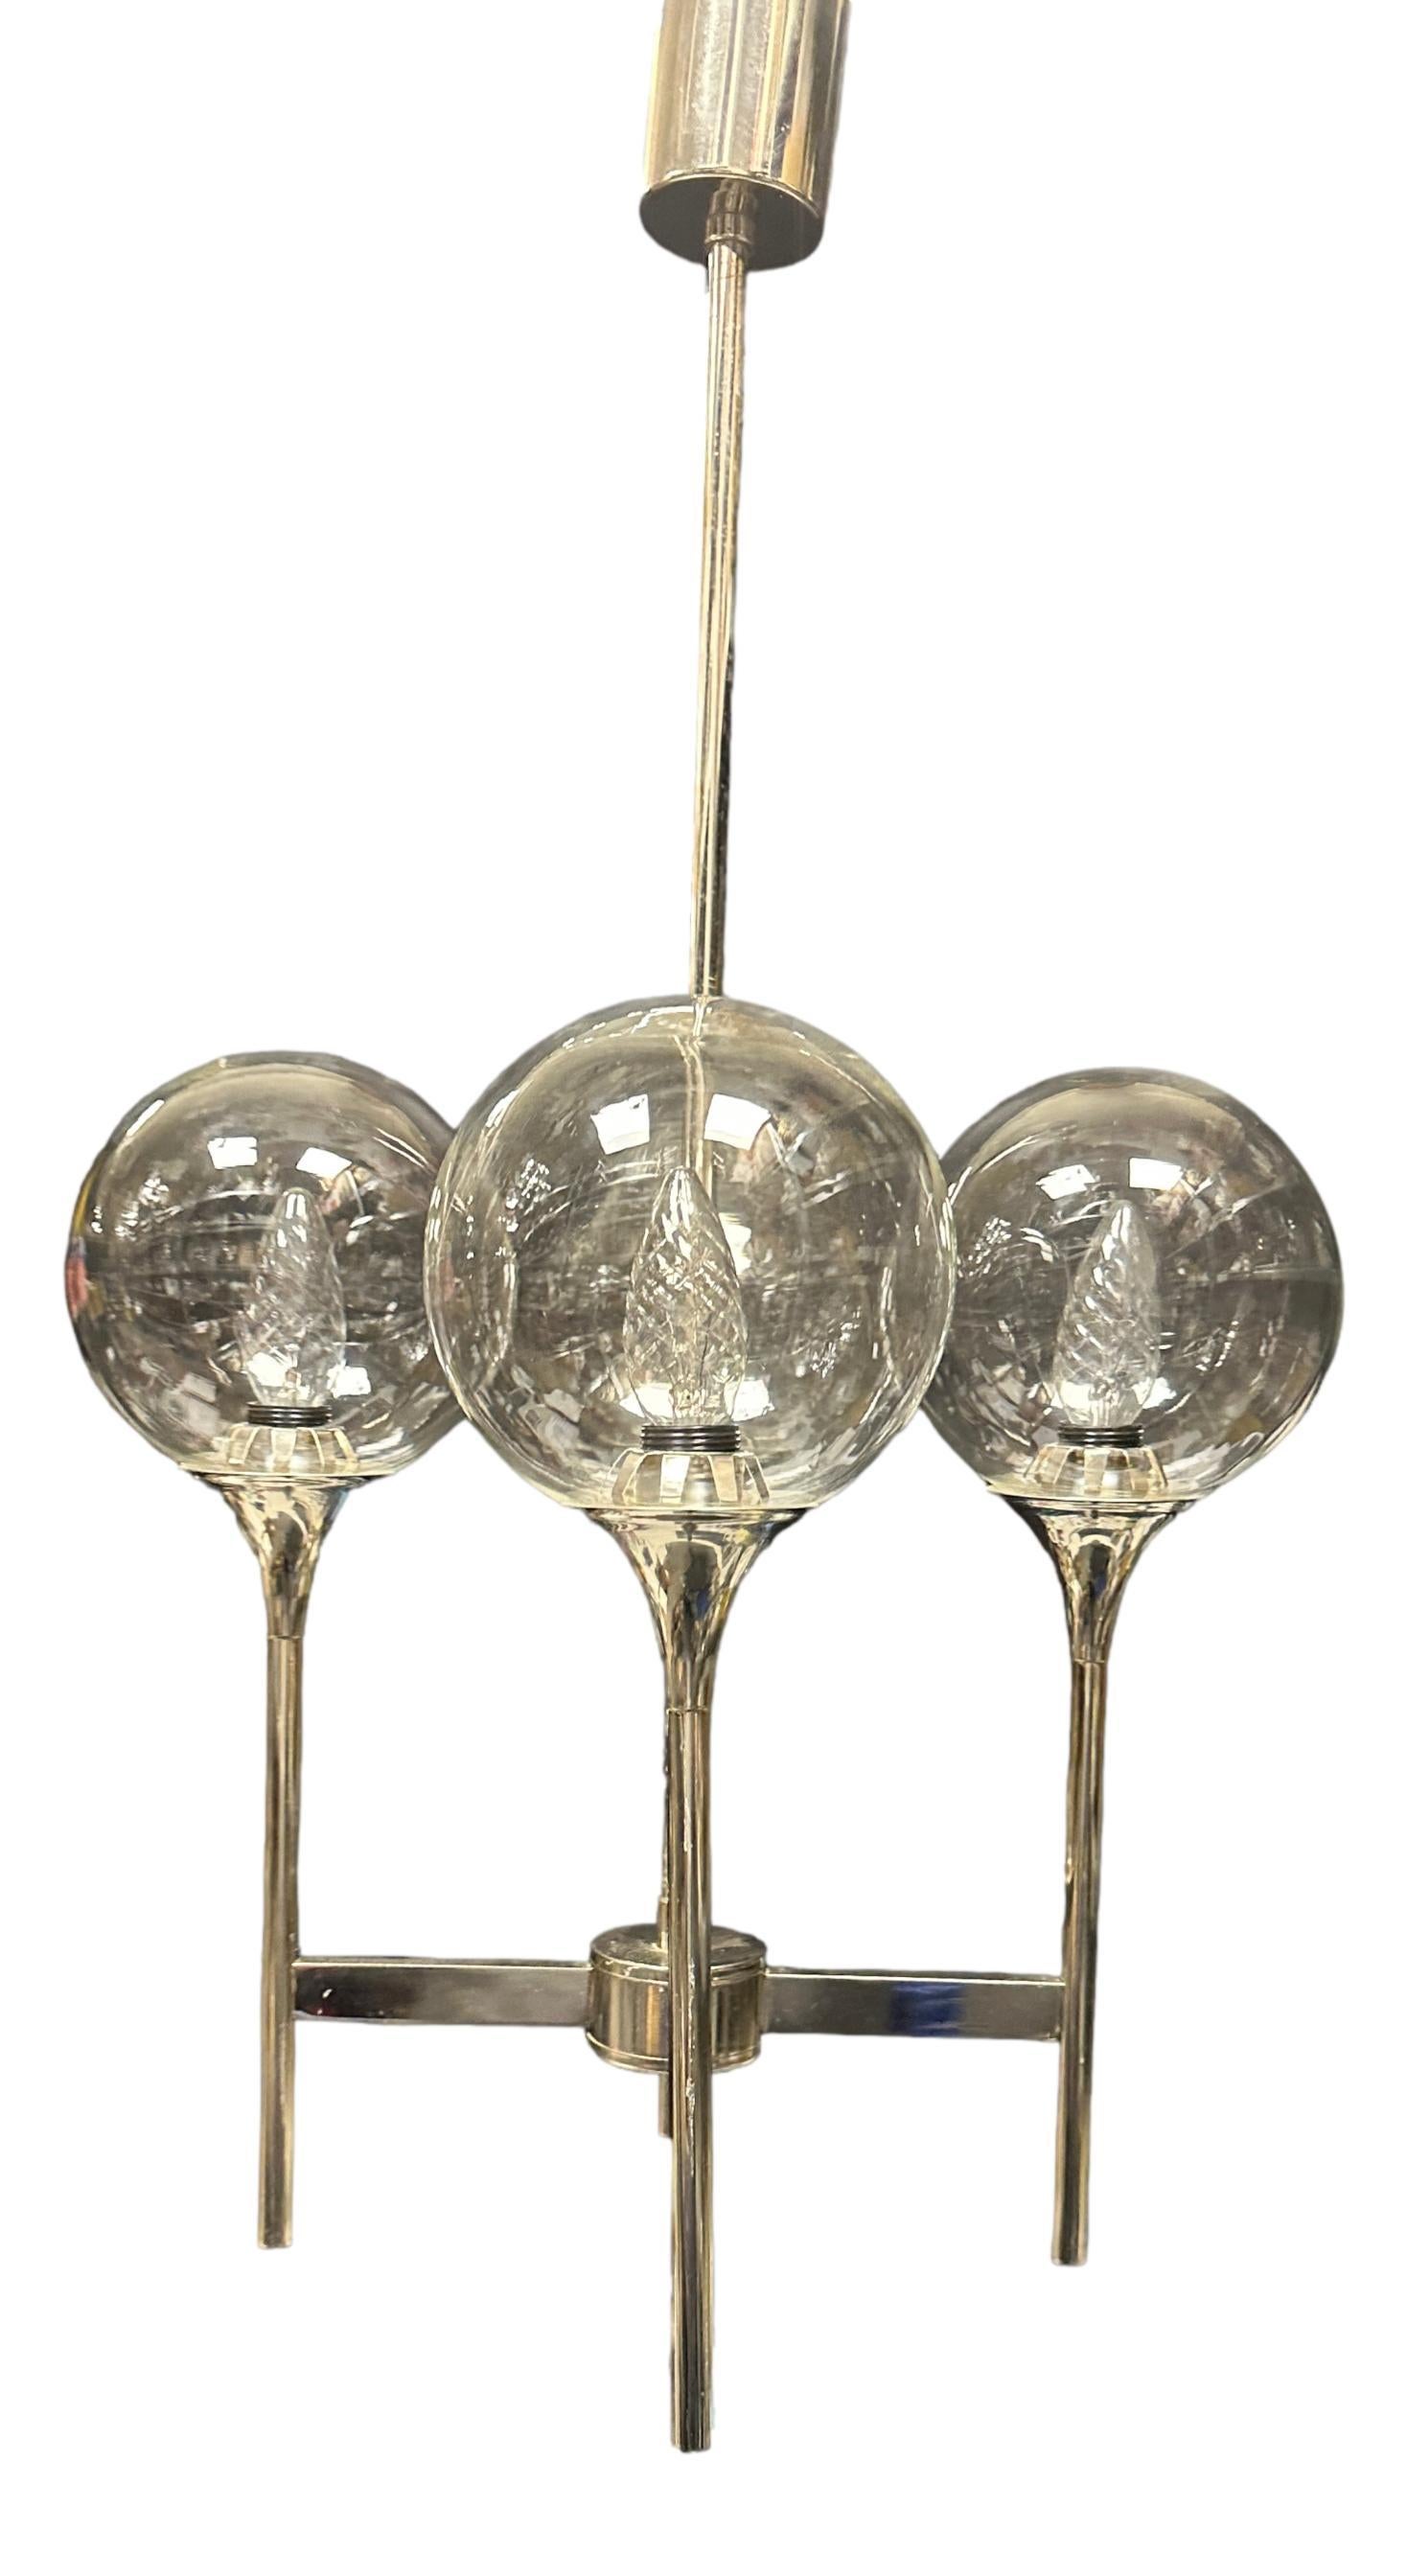 Pair of Reggiani Sciolari Style 1970S 4 Light, Chrome and Glass Ball Chandelier For Sale 9